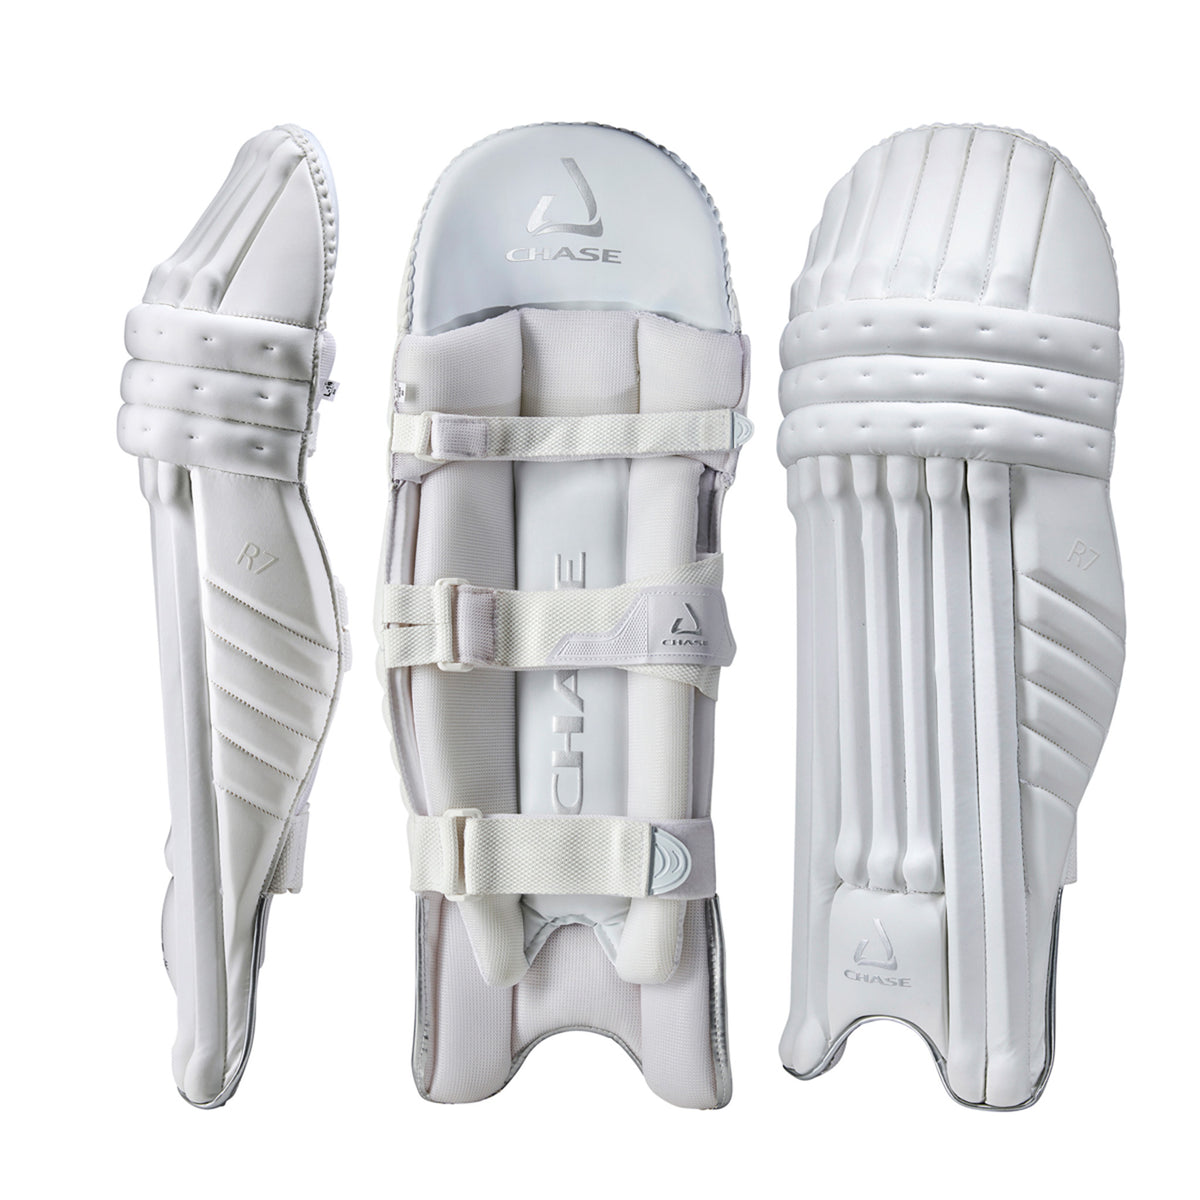 Chase R7 Cricket Batting Pads